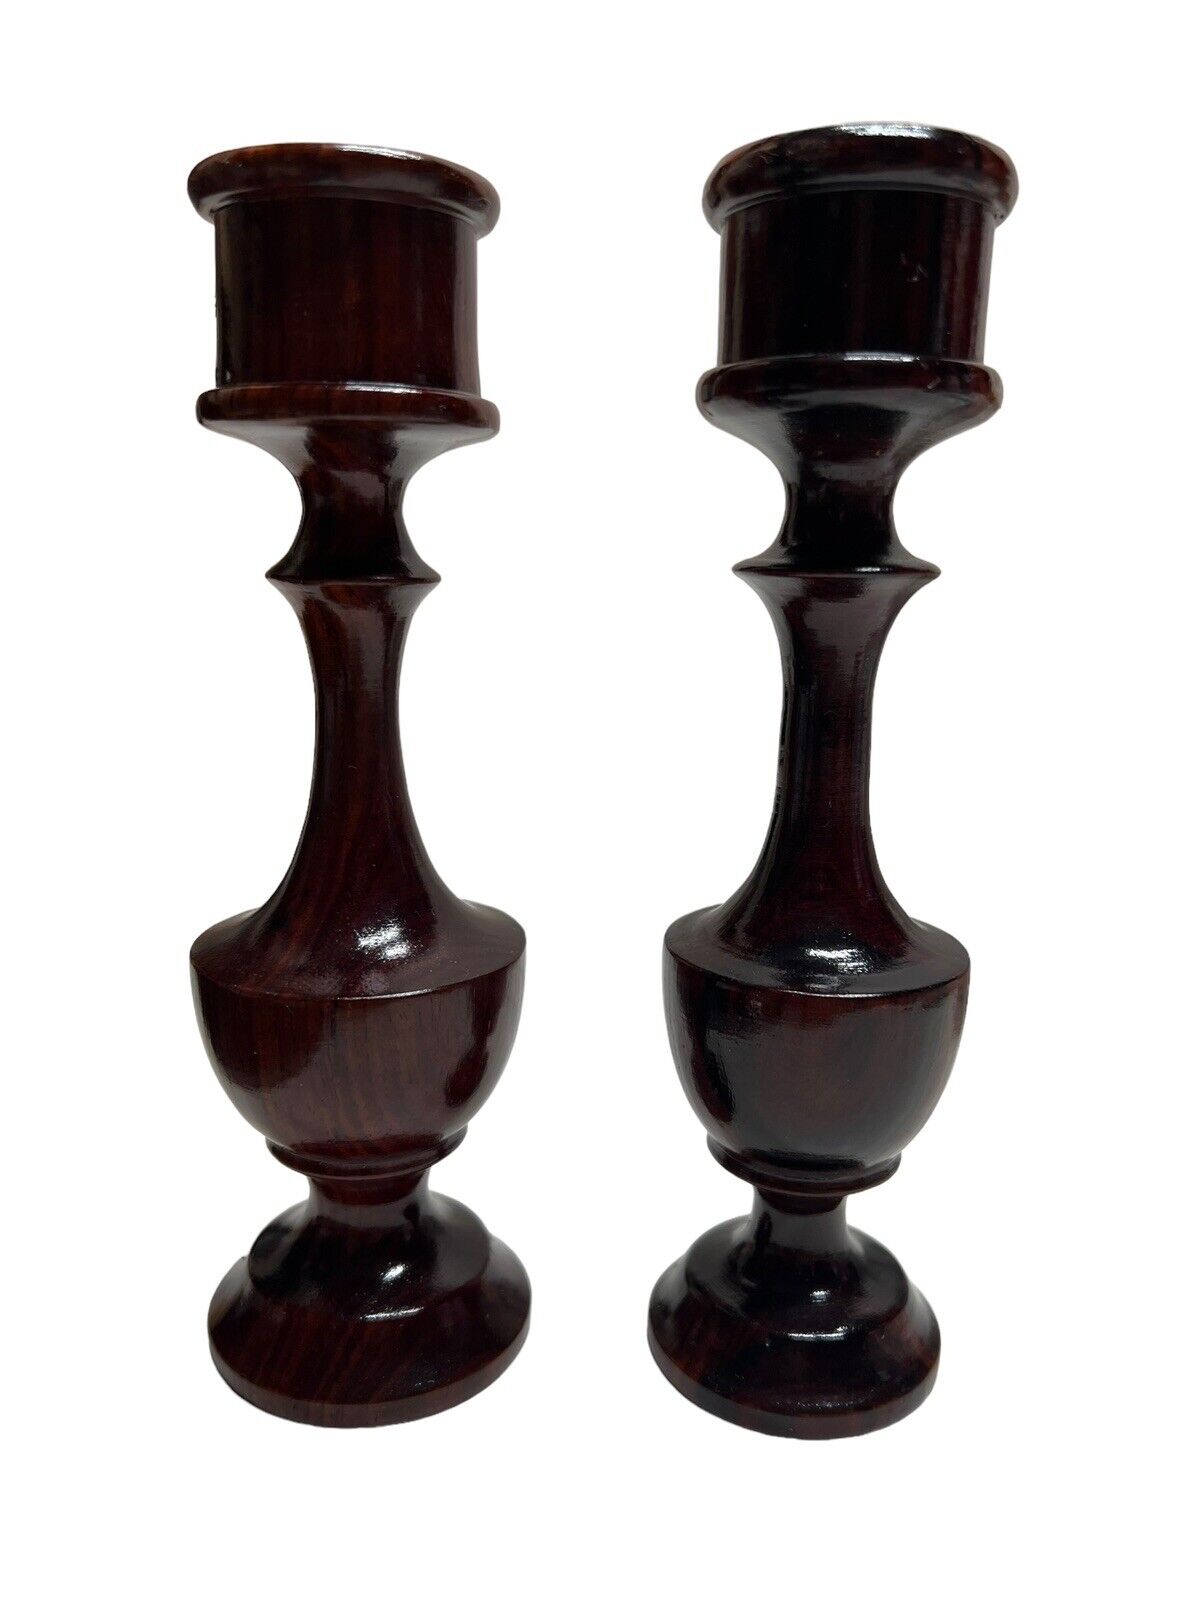 Vintage Handmade Turned Dark Stained Wooden Candle Holder Candlestick